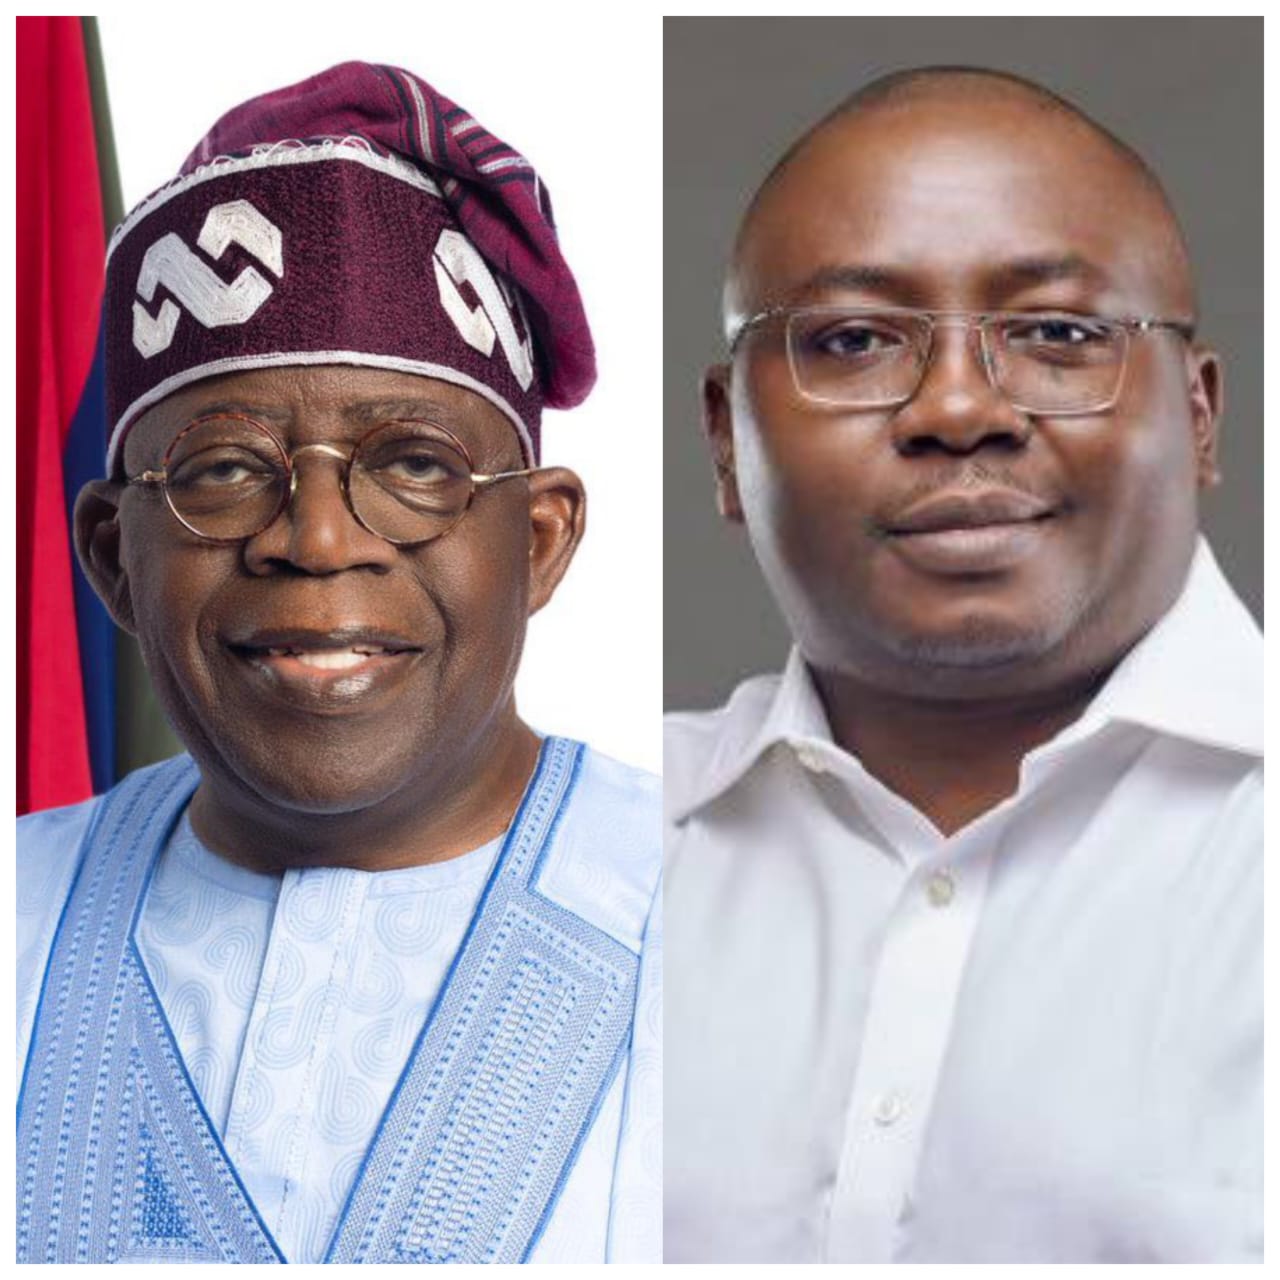 Adelabu Congratulates President Tinubu on Supreme Court Victory, Advices All Parties to Unite in Pursuit of National Progress